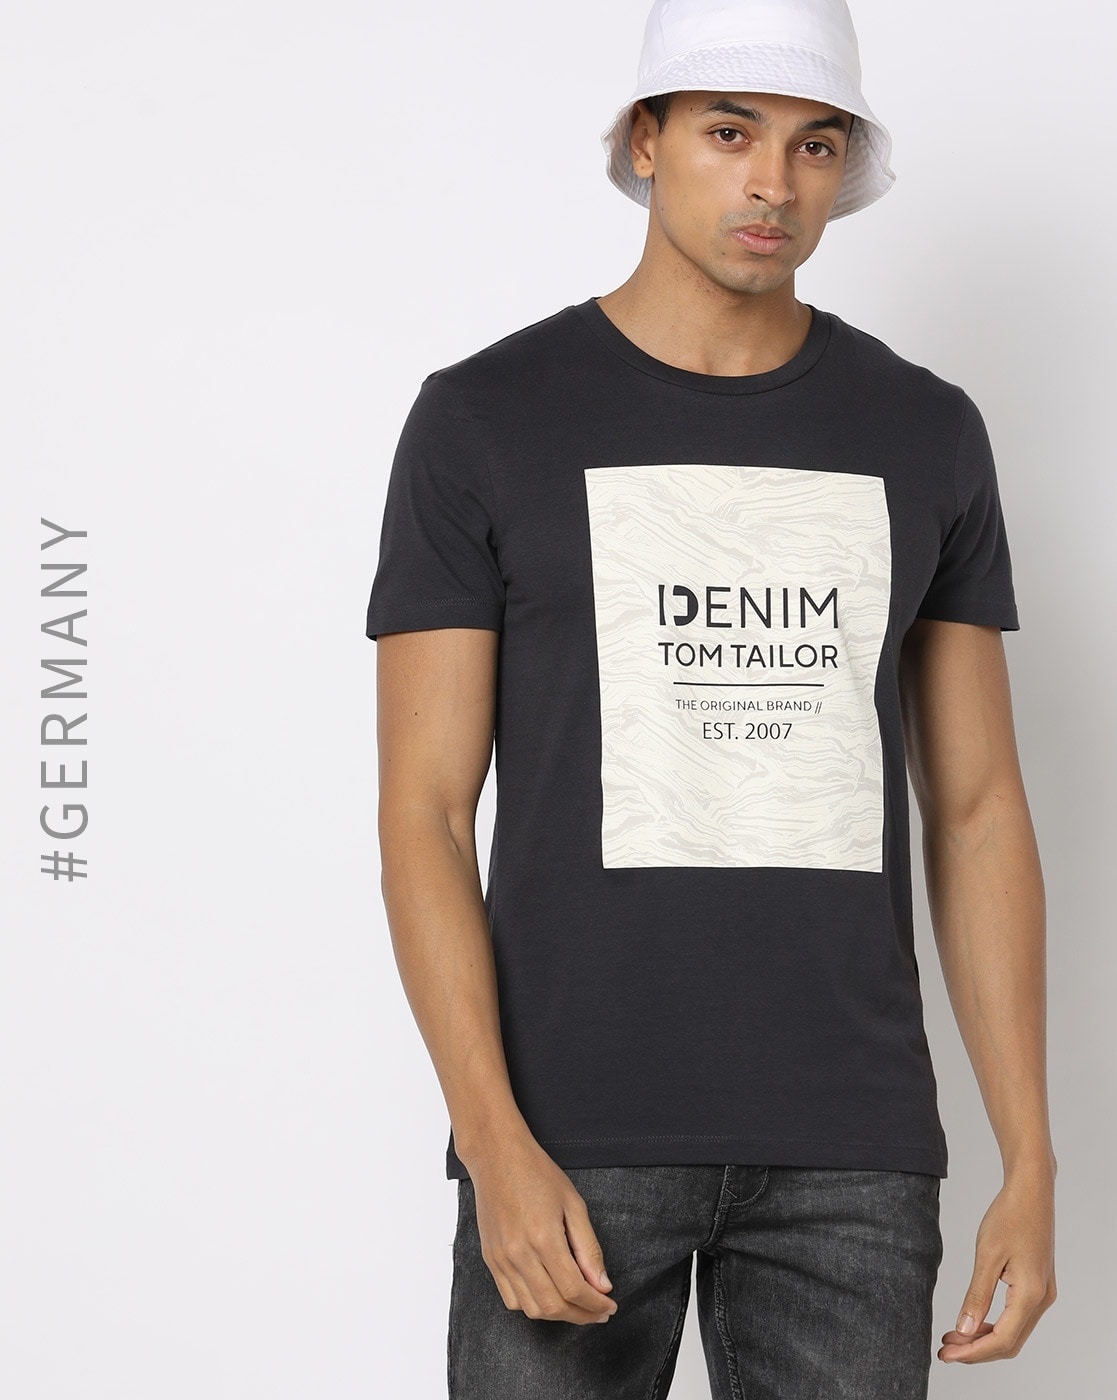 Online by Grey for Men Buy Tshirts Tailor Tom